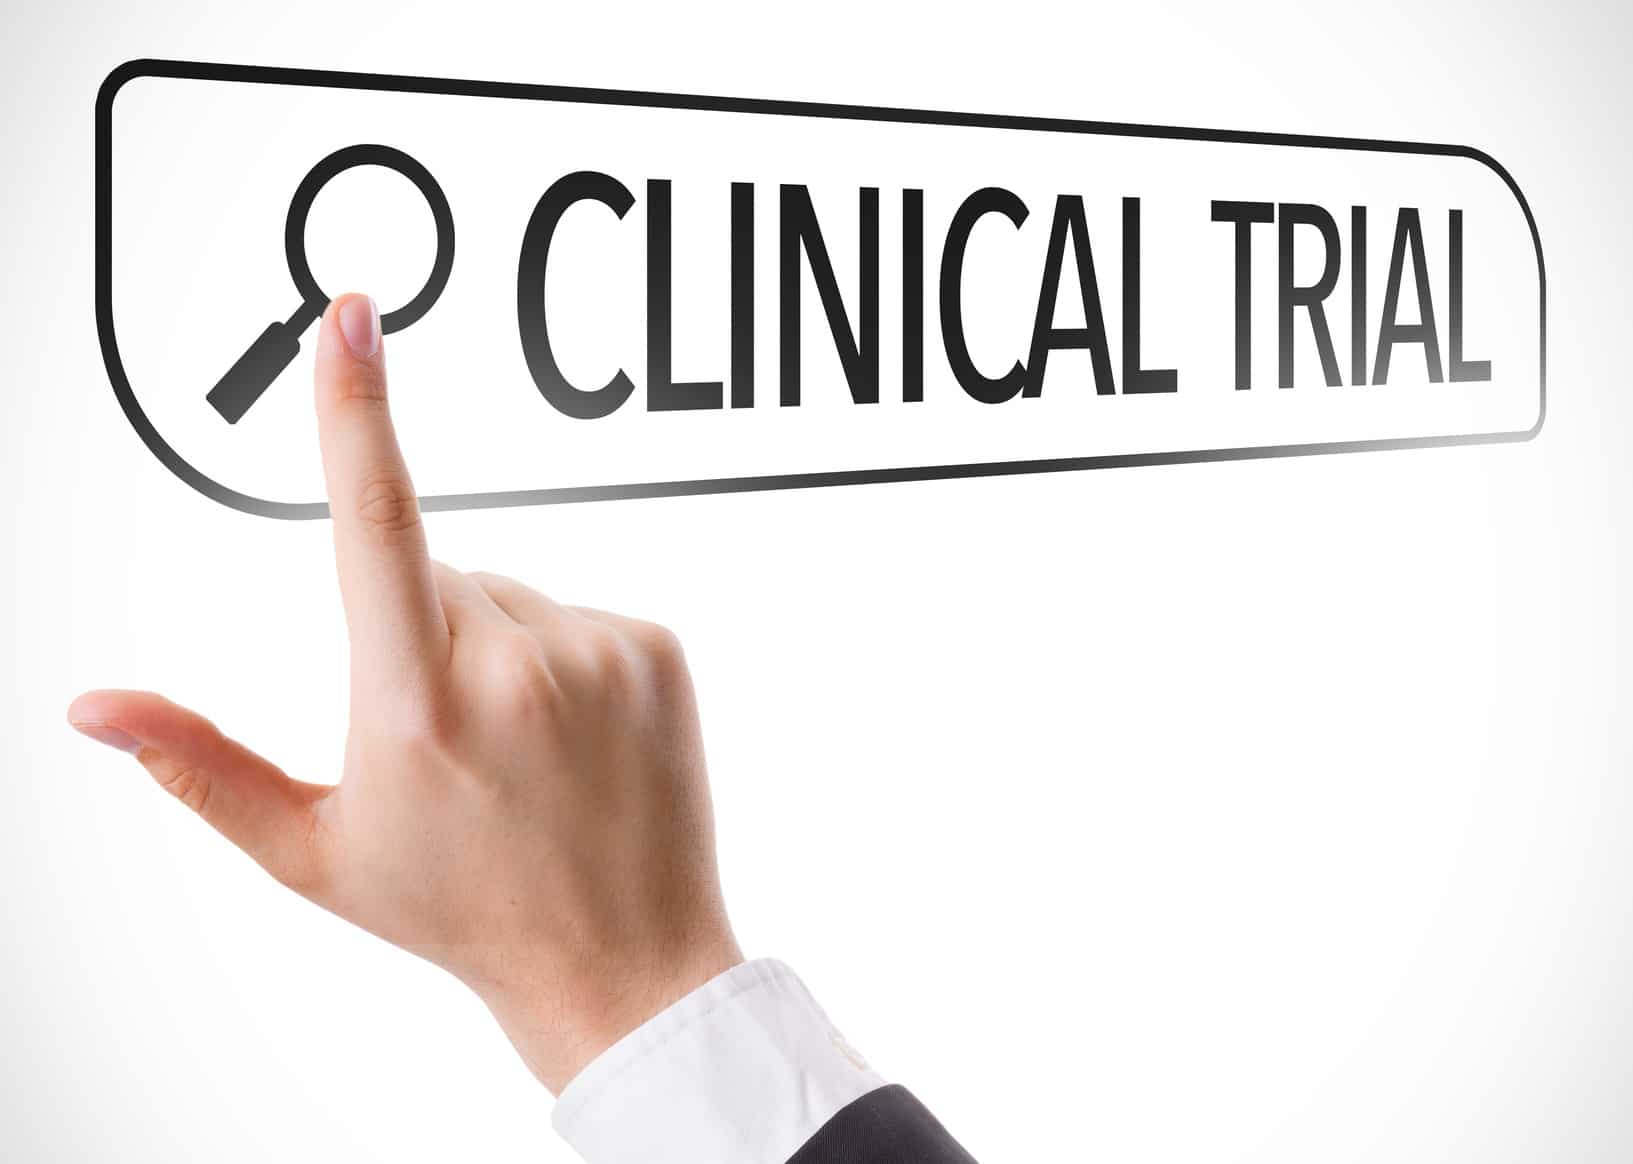 Alliance for Aging Research Suggests Improvements to ClinicalTrials.gov